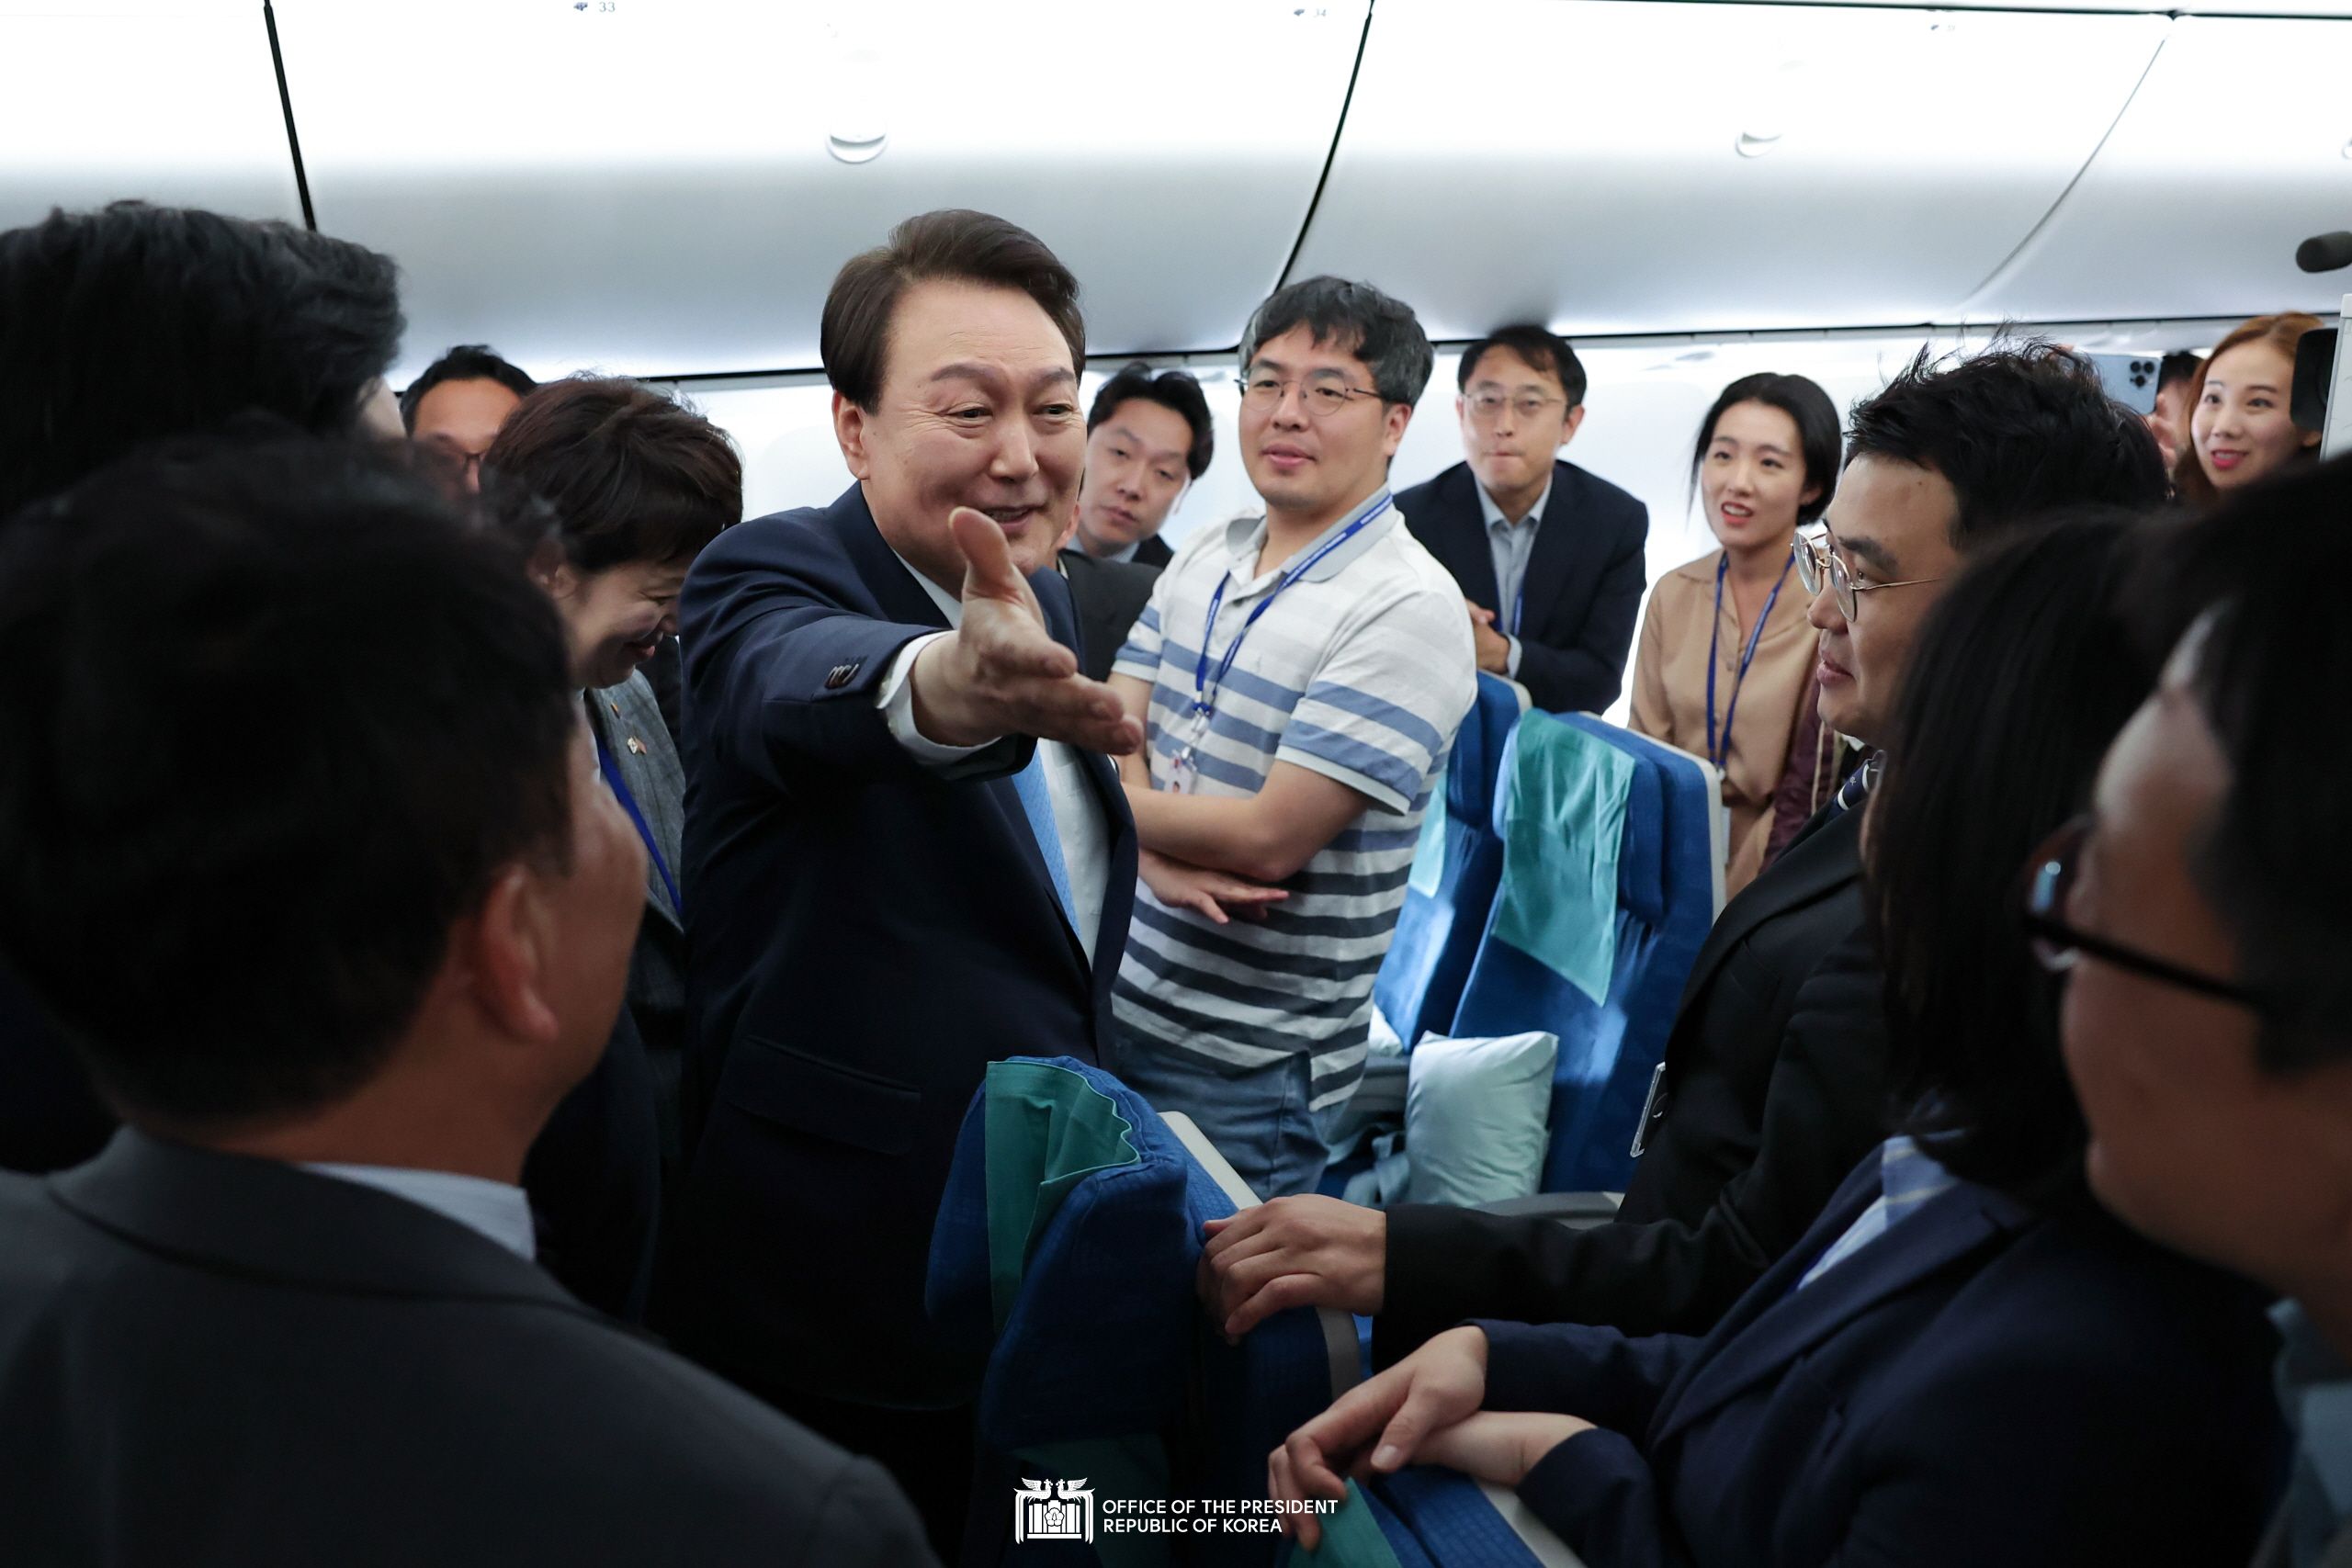 The President and First Lady meeting with the press corps during the flight to Seoul Slide3